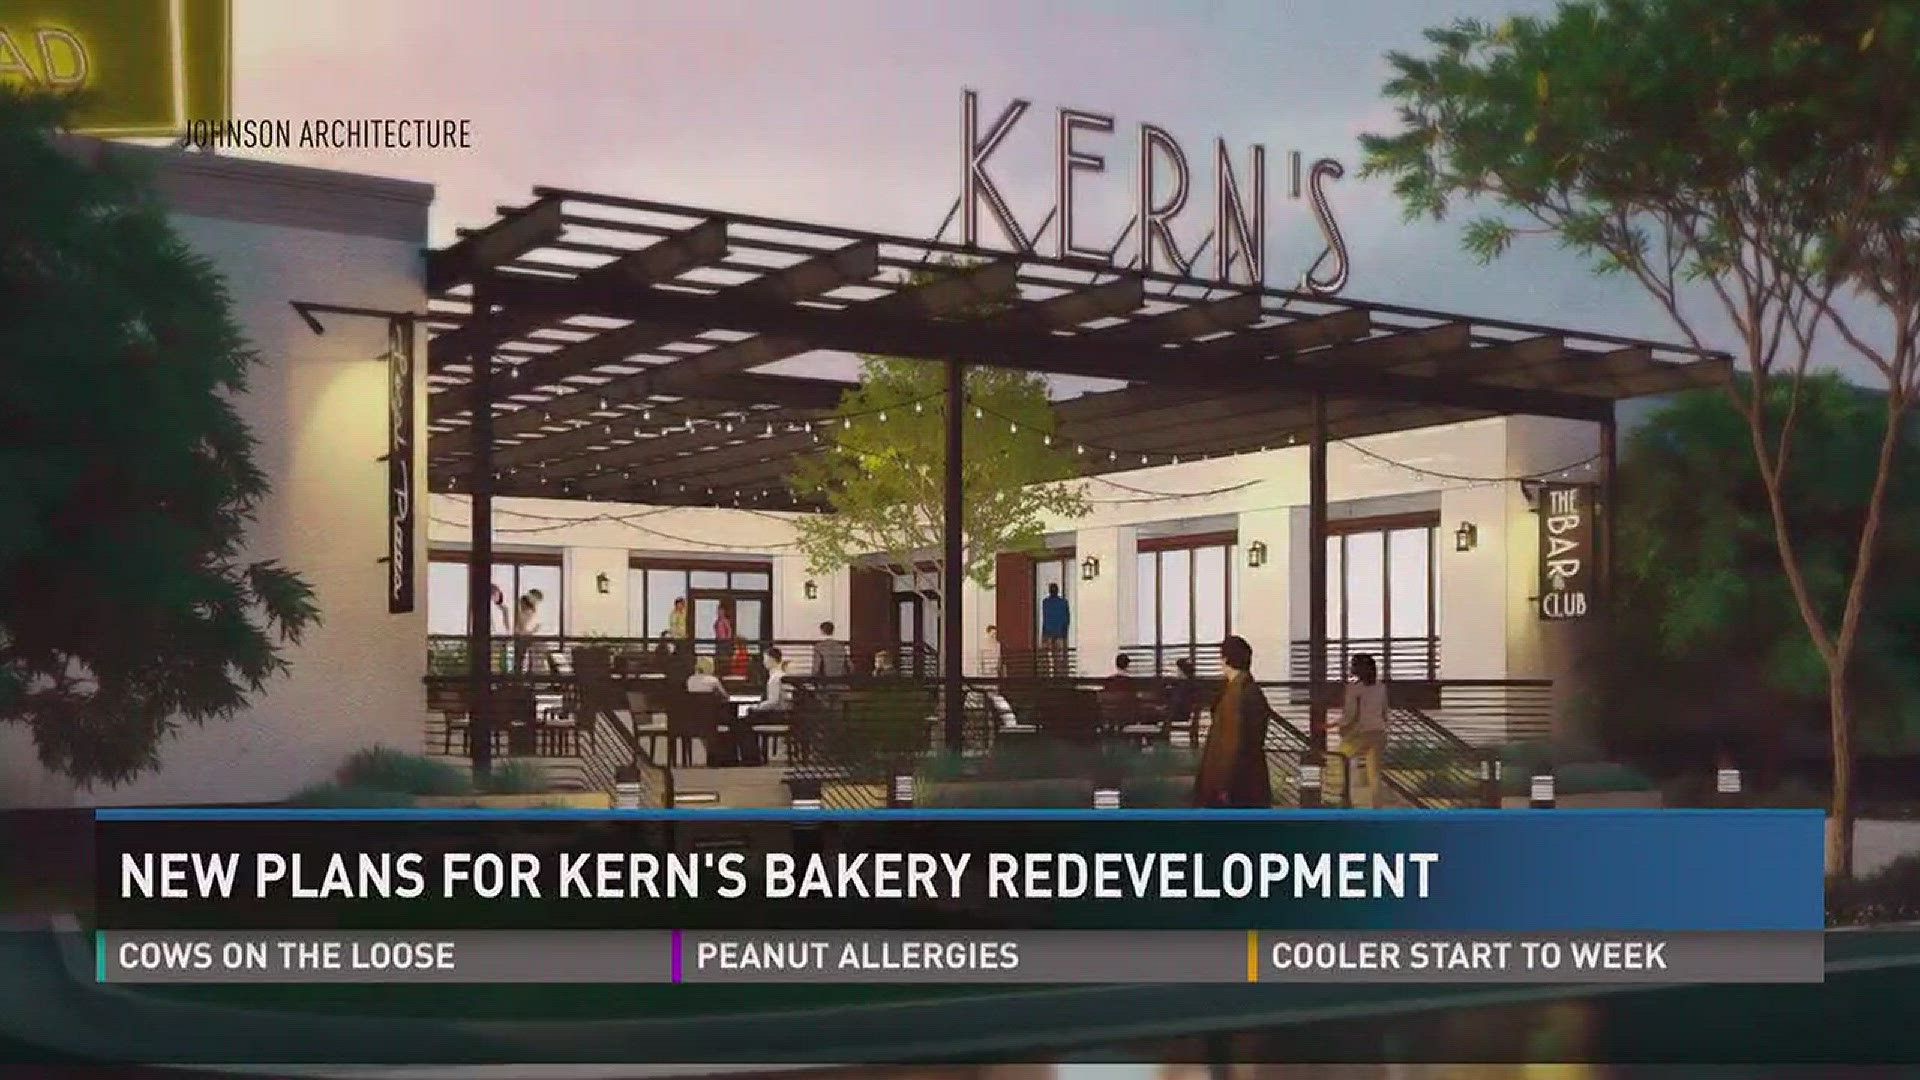 Oct. 13, 2017: The Kern's Bakery building in South Knoxville has a new owner with big plans for redevelopment.